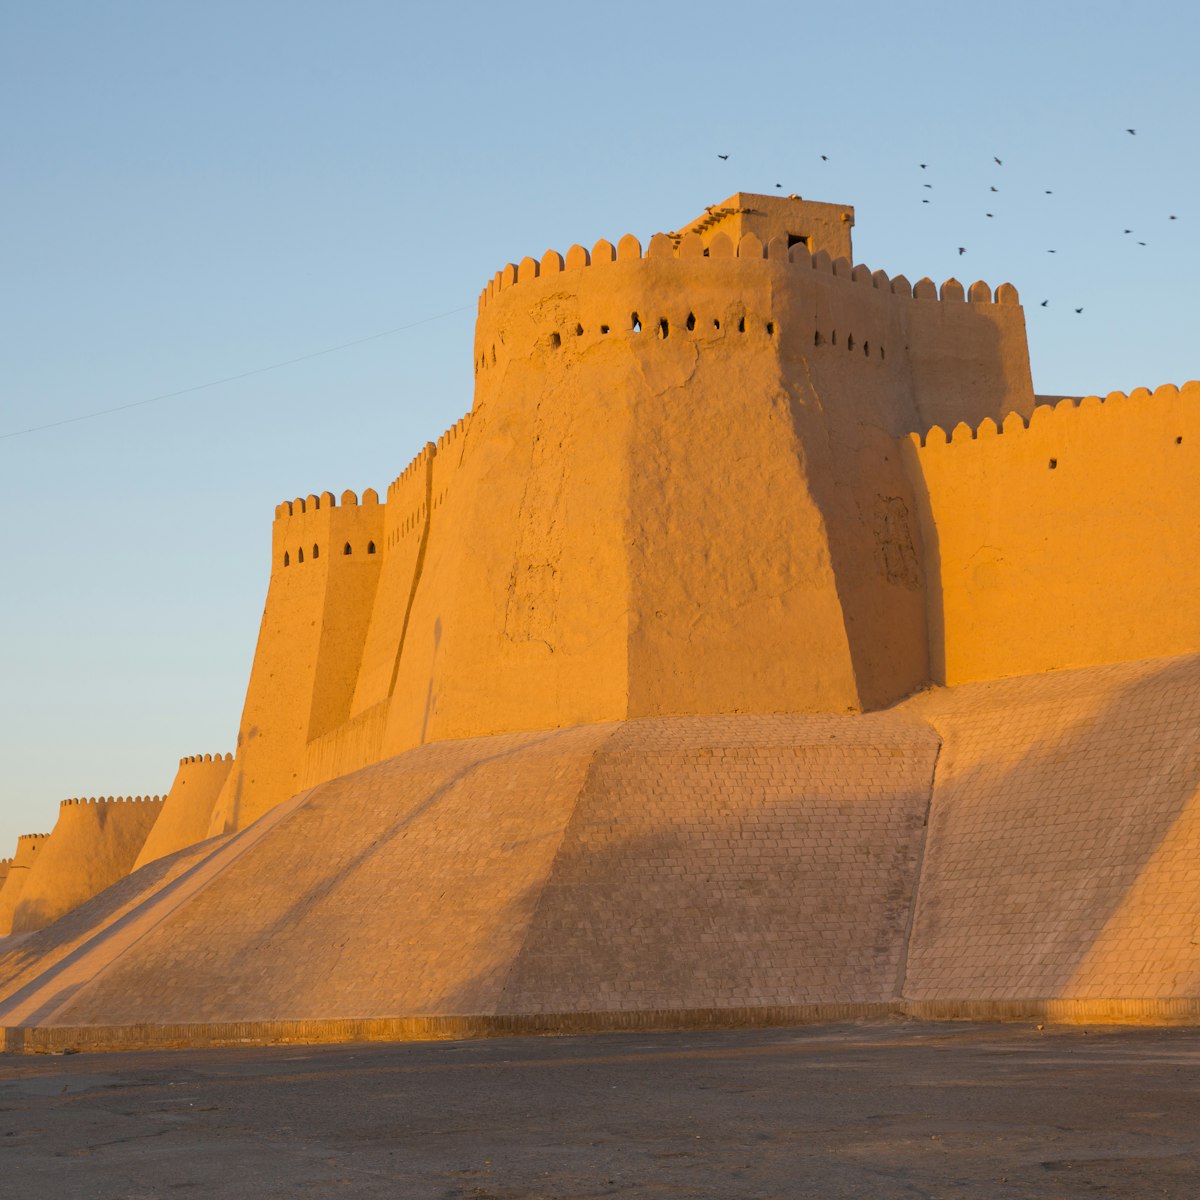 The watchtower of the Khuna Ark, the fortress and residence of the rulers of Khiva, in Uzbekistan.